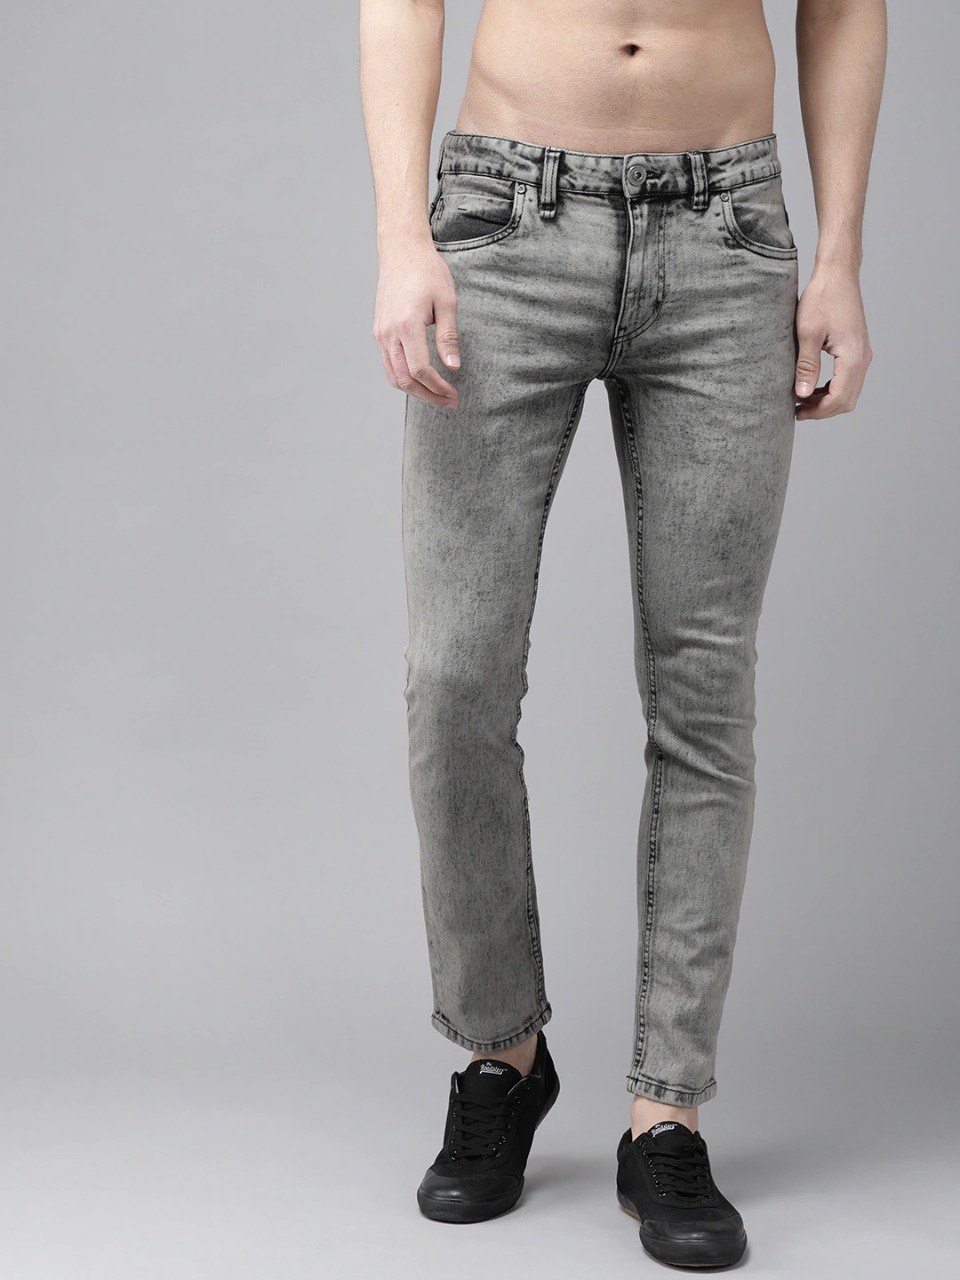 Roadster denim bf jeans mid waist 28 at Rs. 599 | Denim, Roadsters, Style